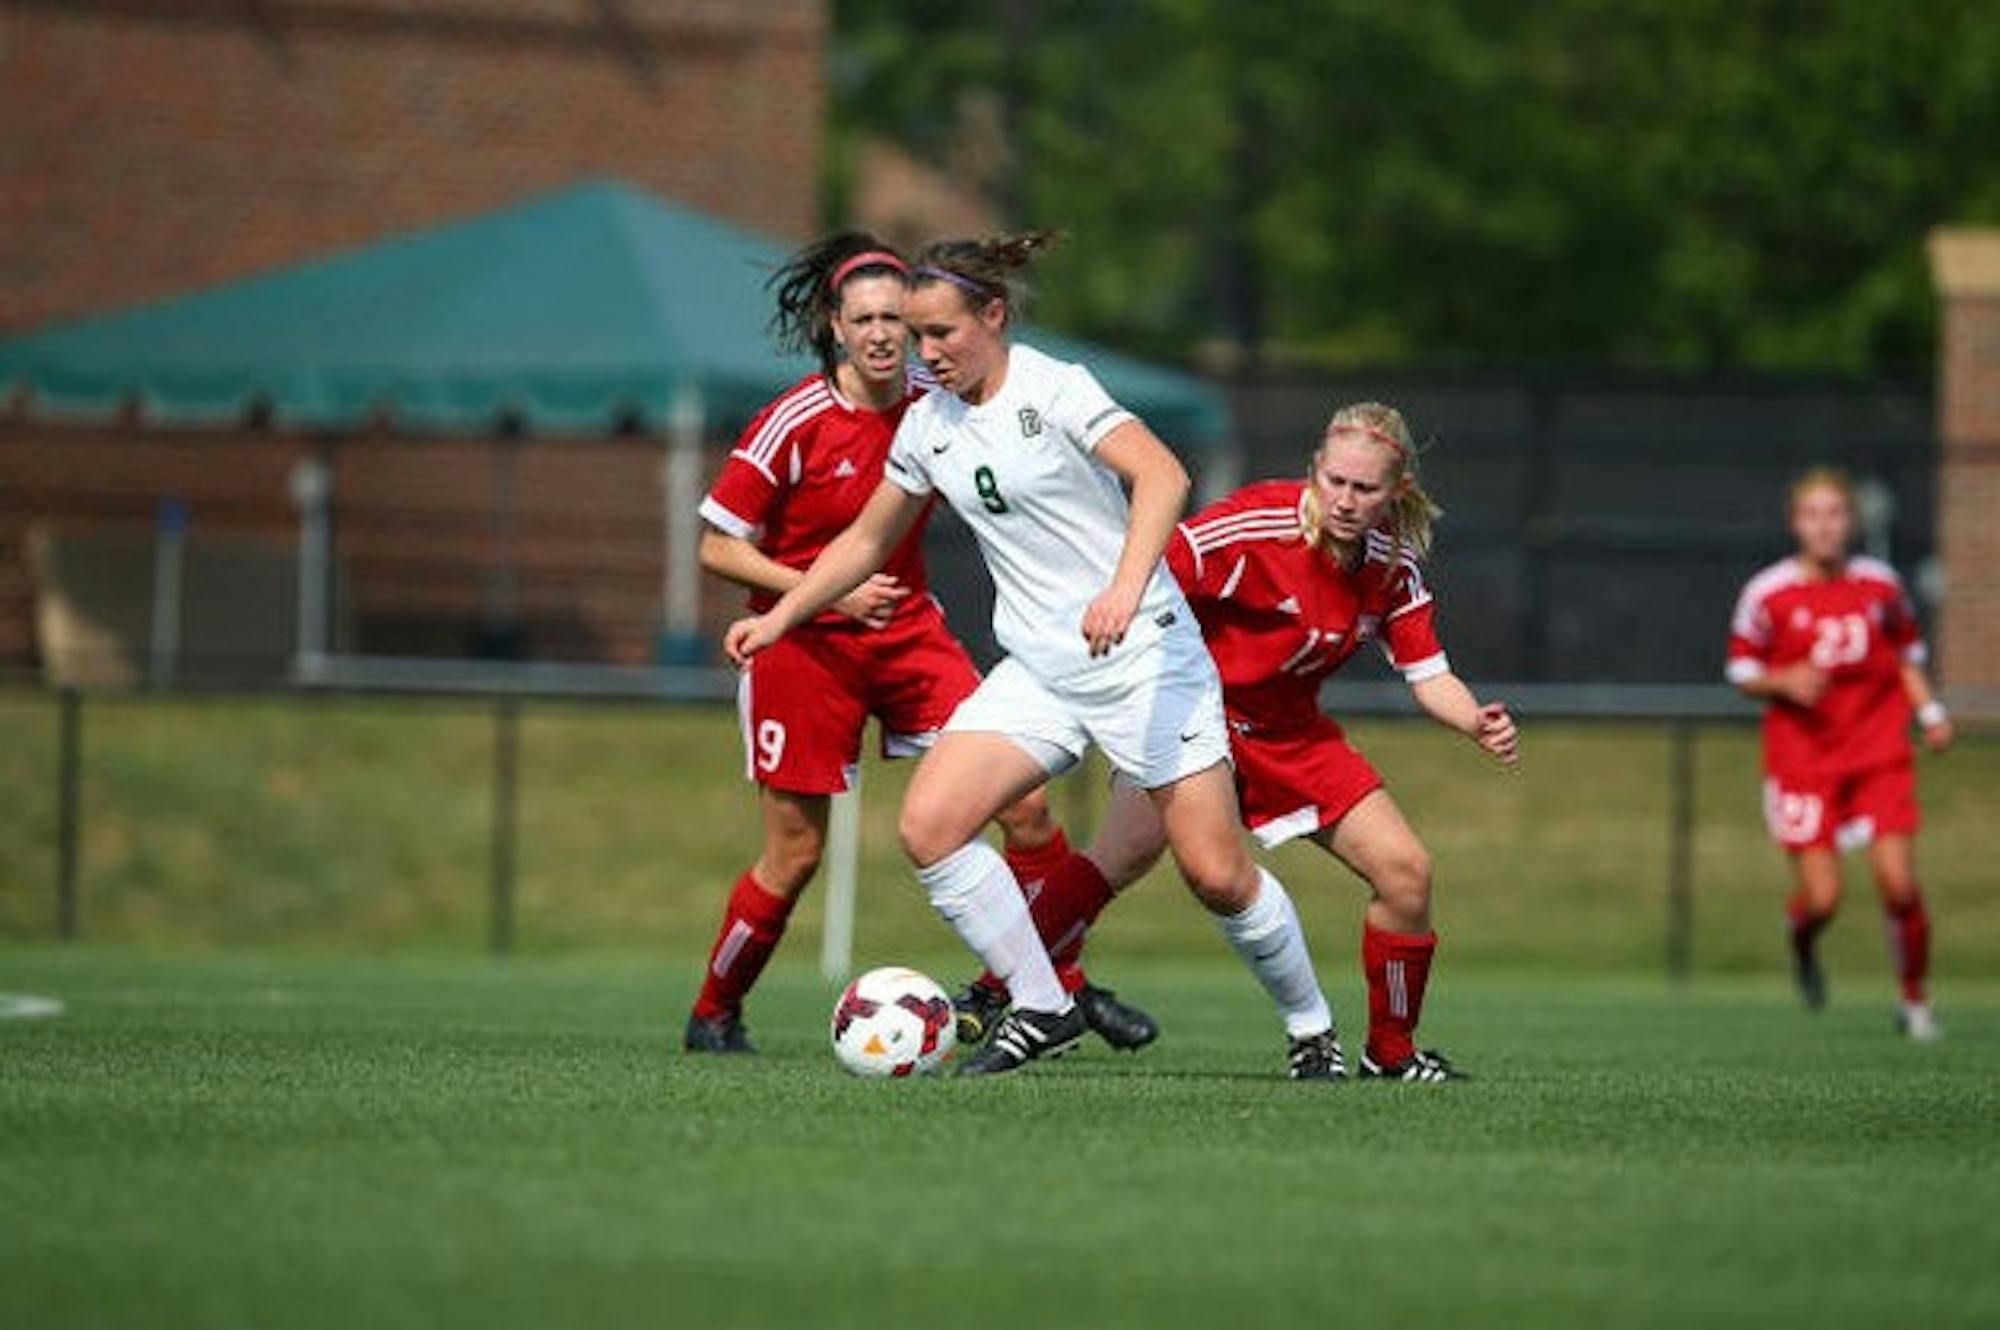 Holly Patterson '17 comes to Hanover from the New Zealand national team.